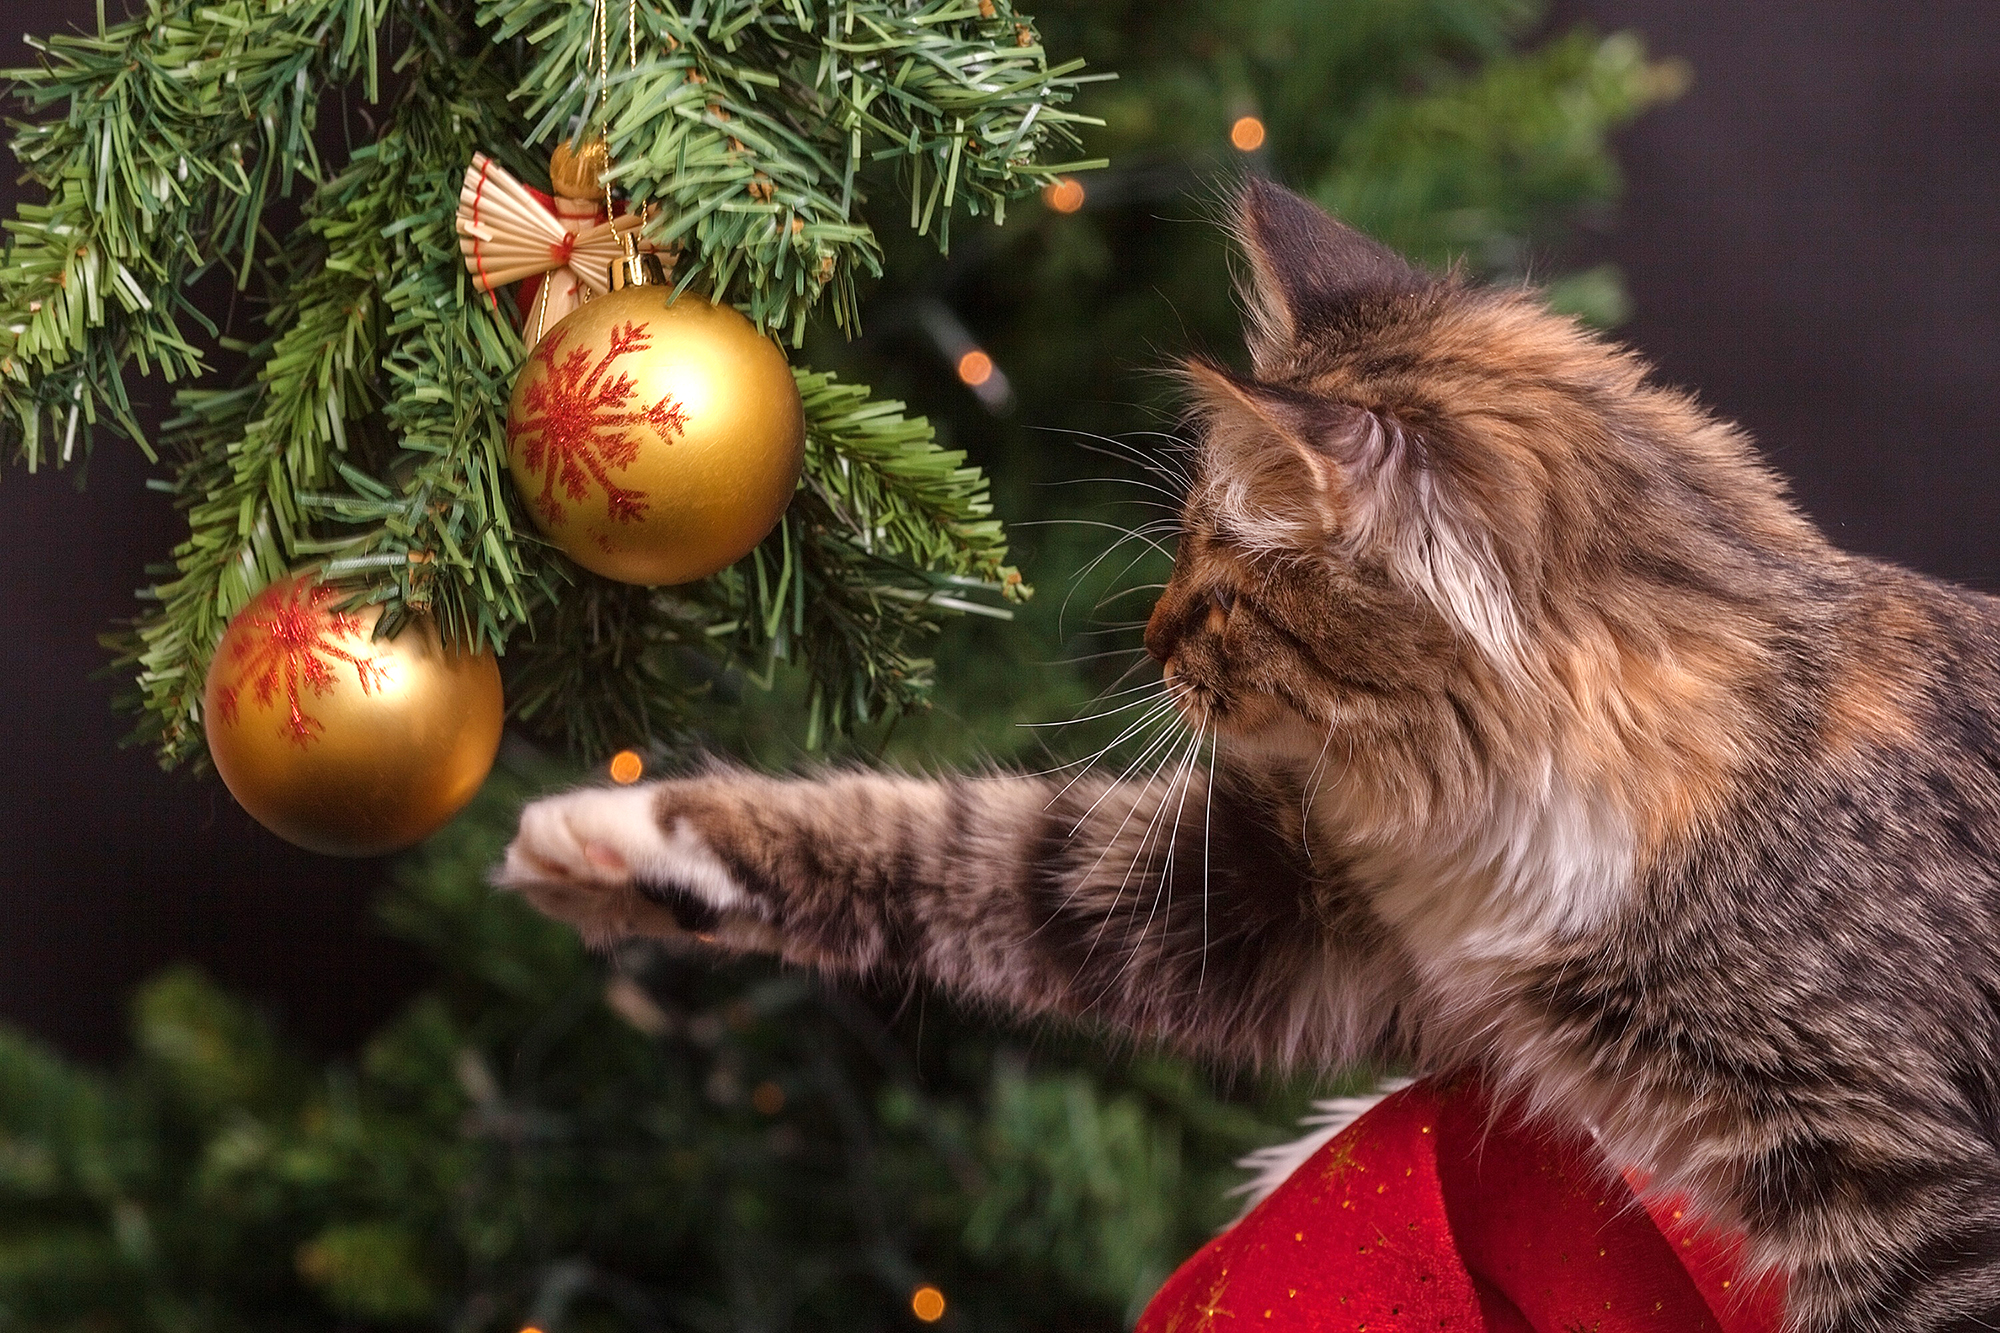 cat batting at gold ball ornaments on a Christmas tree